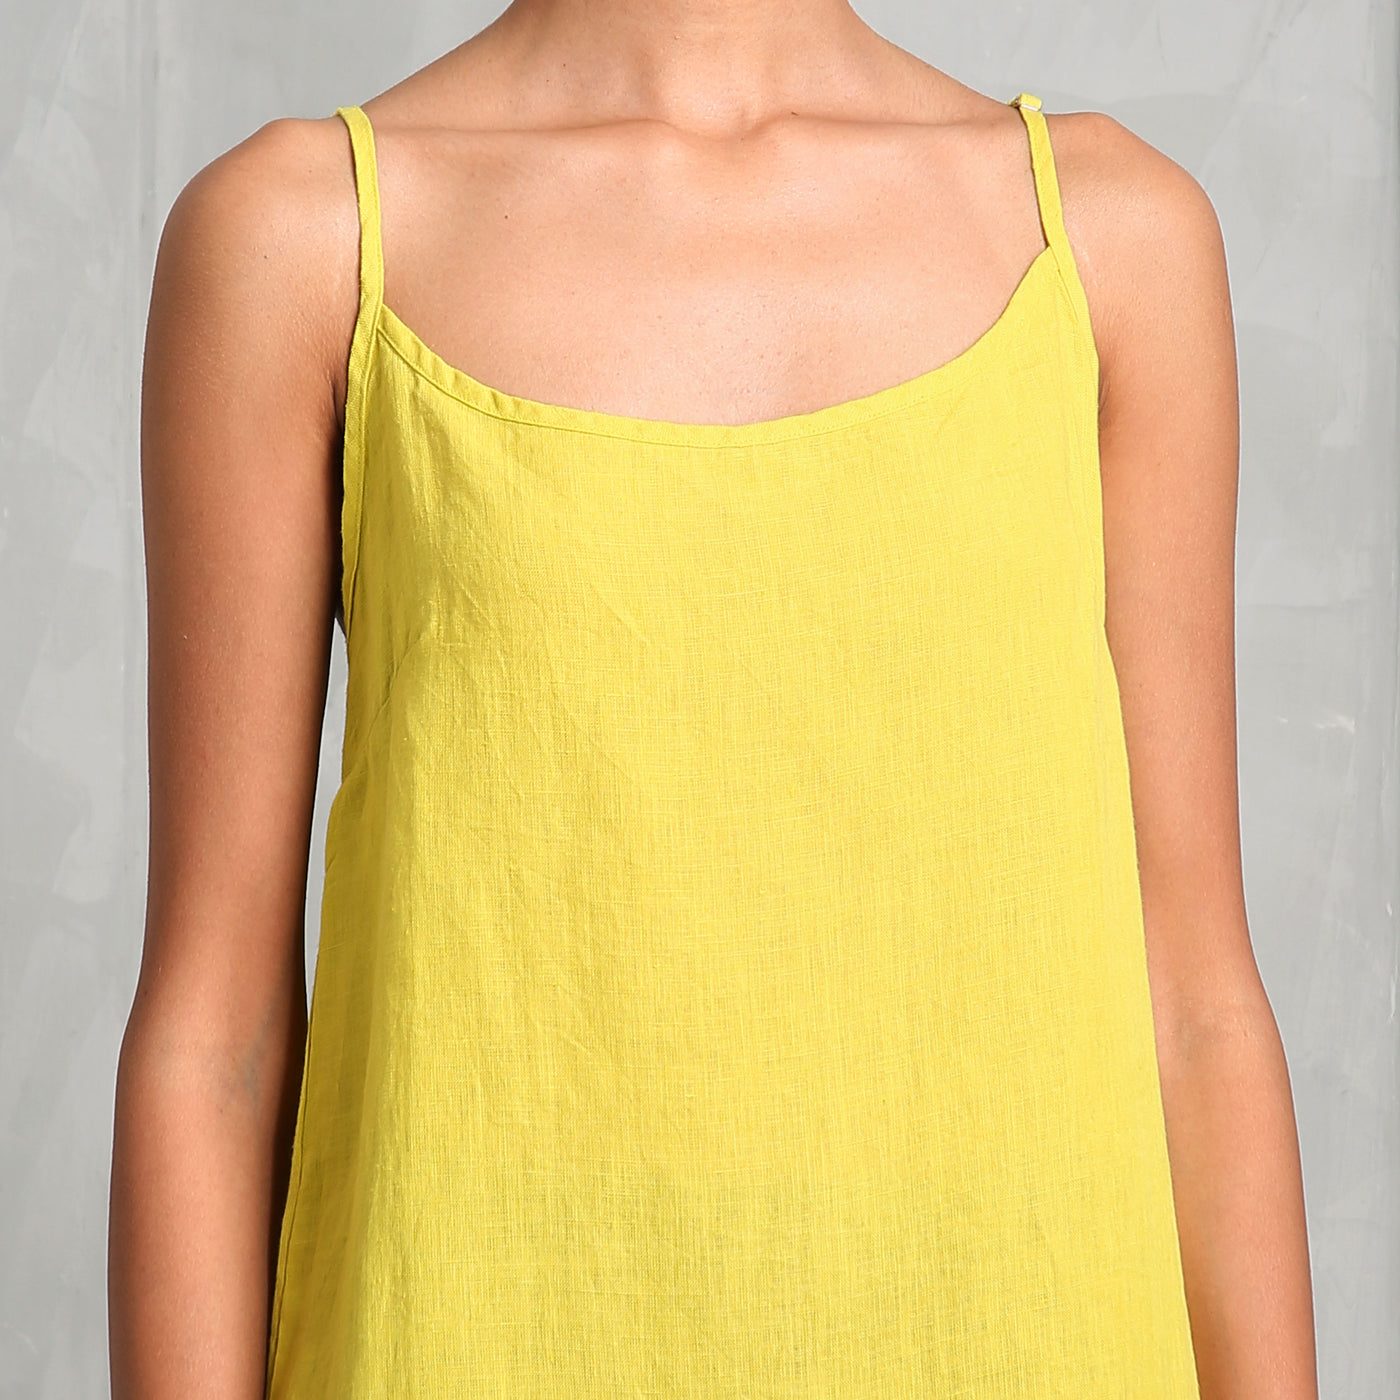 Saphed Keri Slip Dress  features a relaxed fit, round neck.